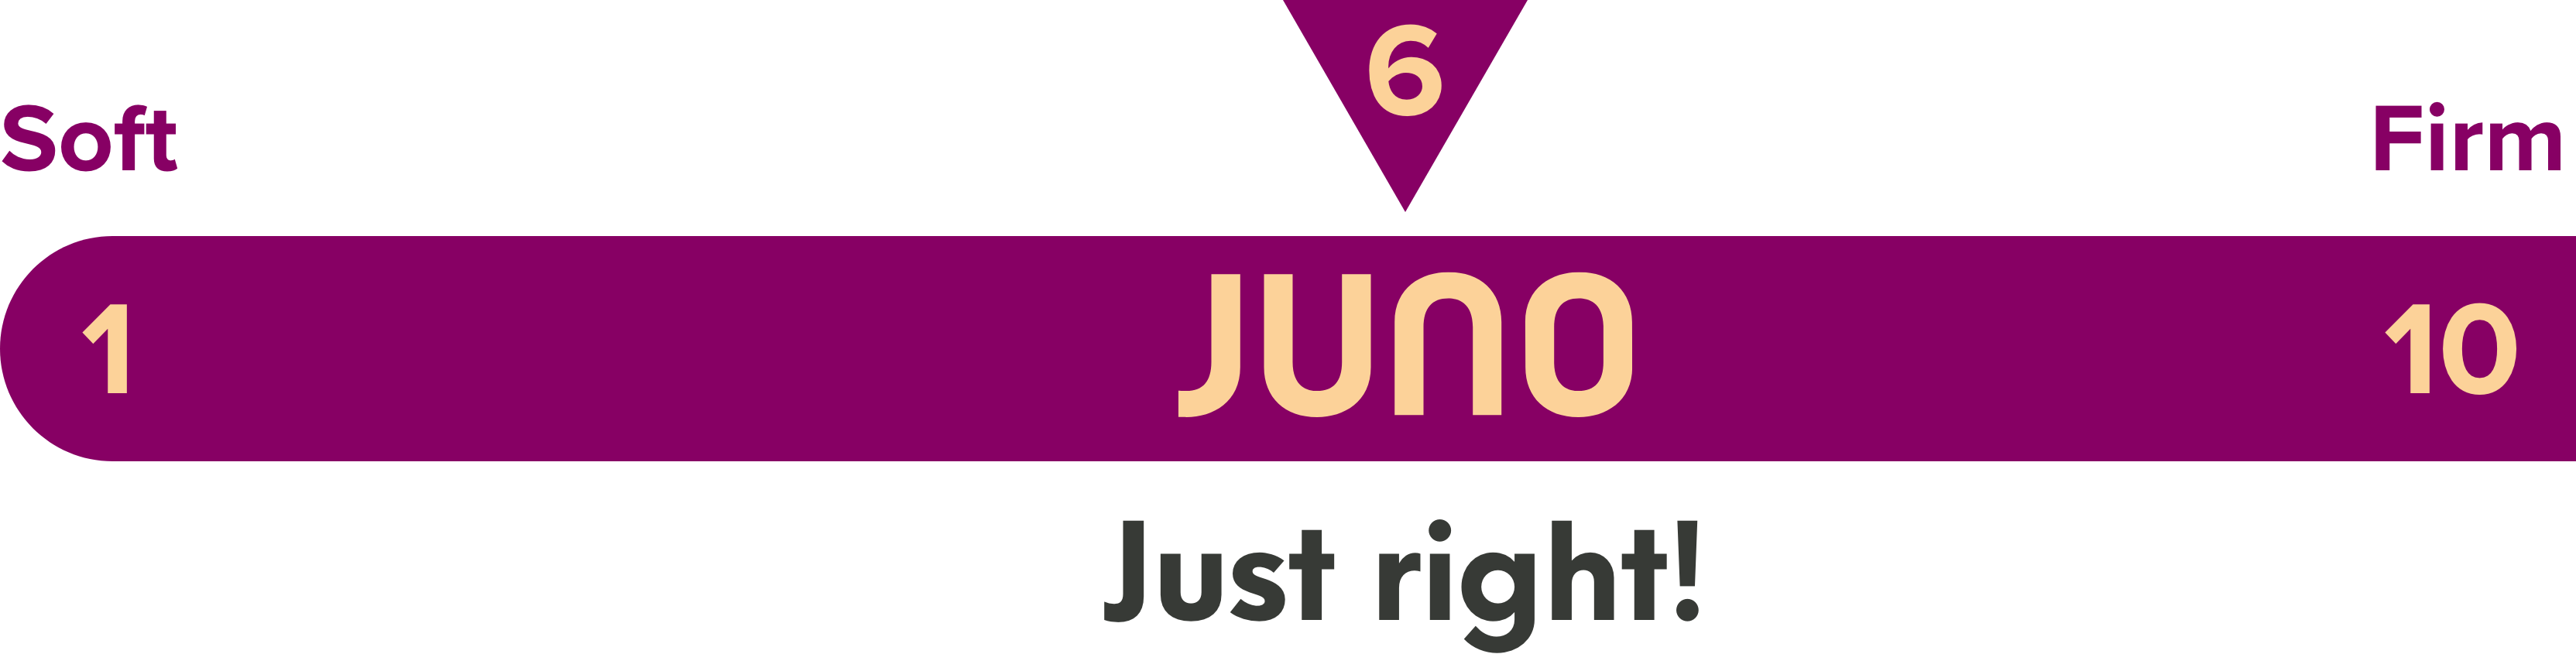 1:Soft | 10: Firm | Juno: Just right!